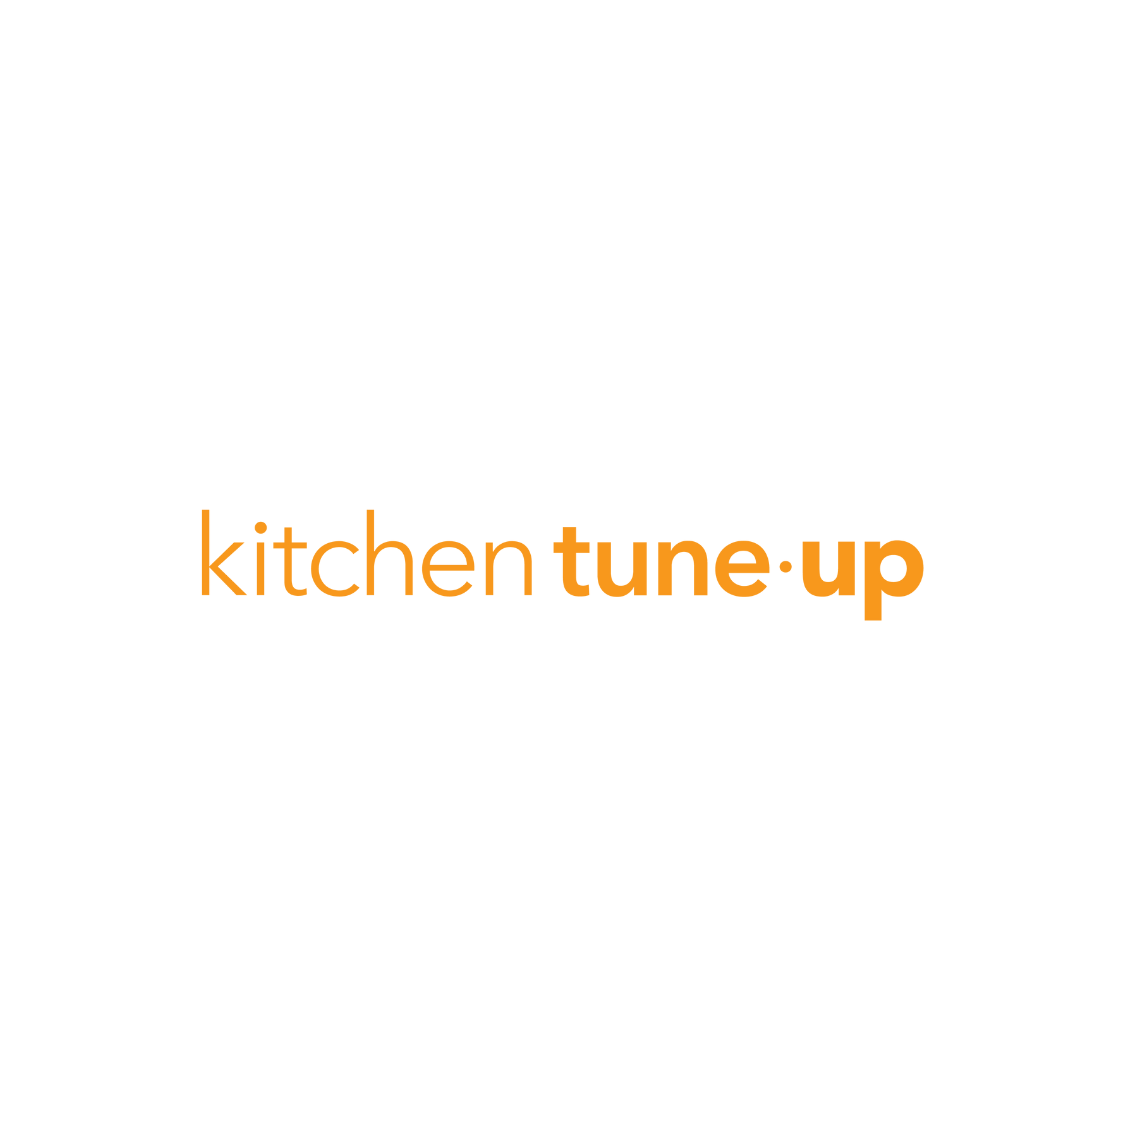 kitchen tune-up of akron canton, oh | kitchen products in north canton